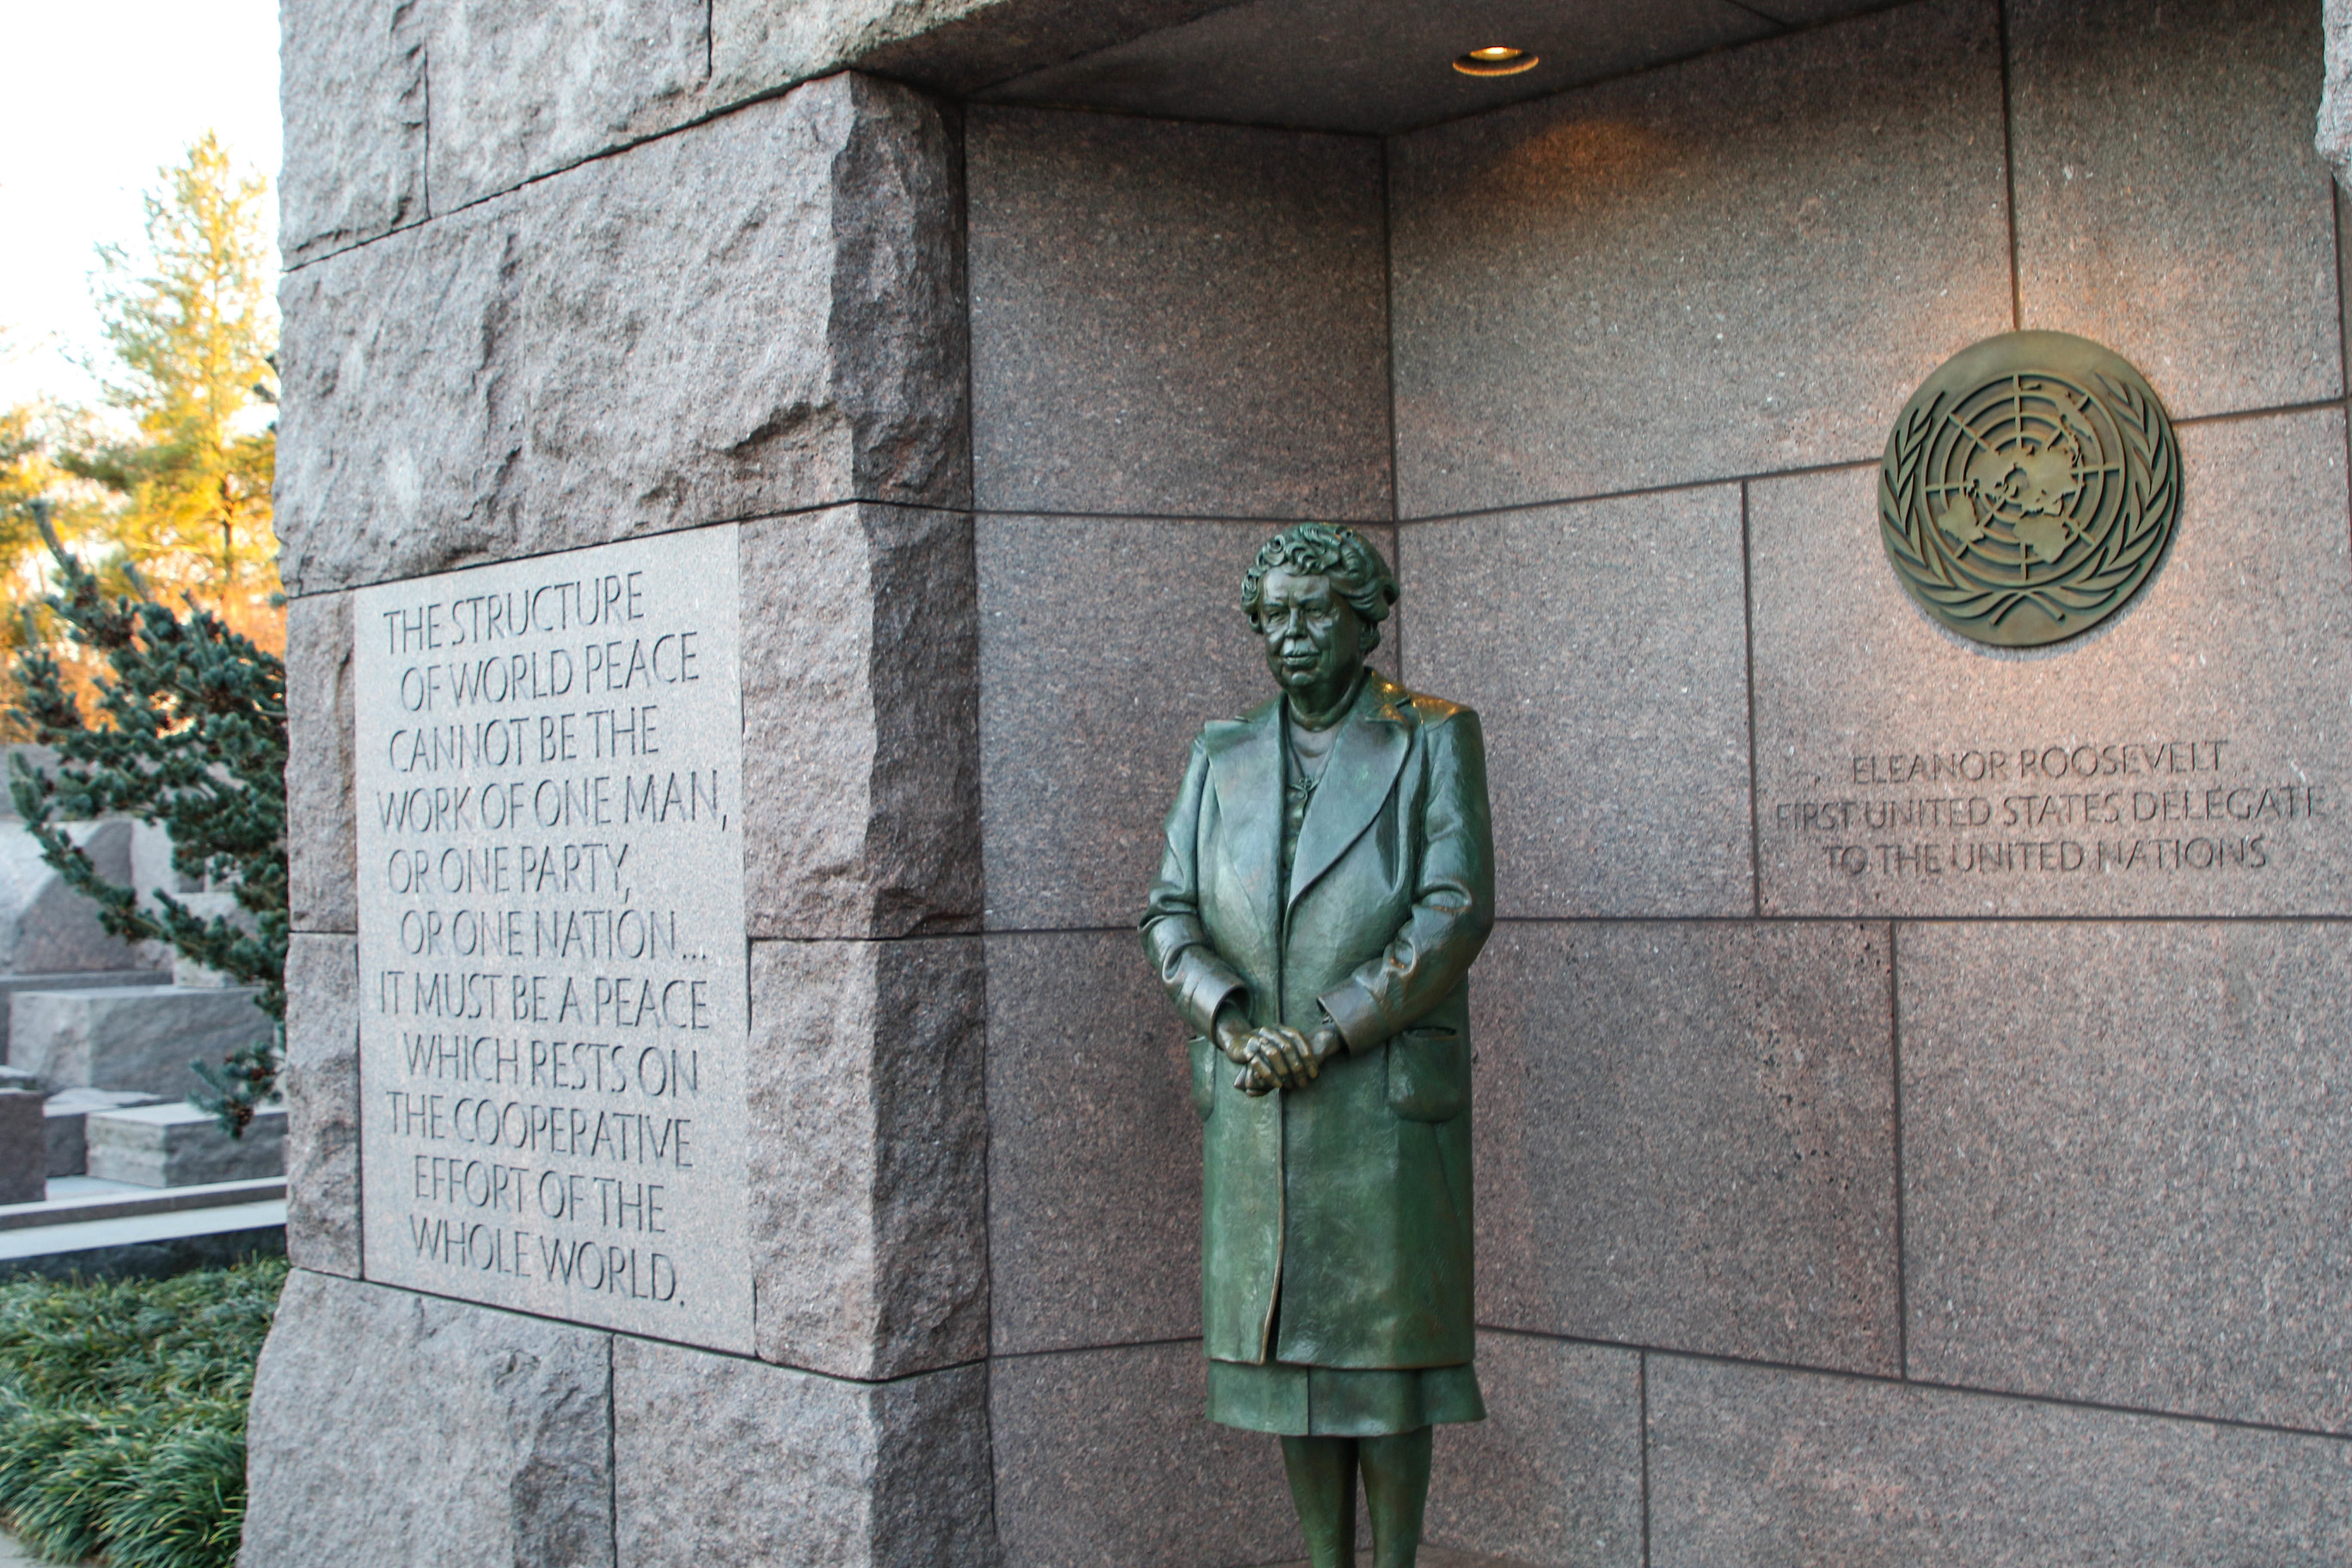 Statue of Eleanor Roosevelt in a stone wall with inscriptions